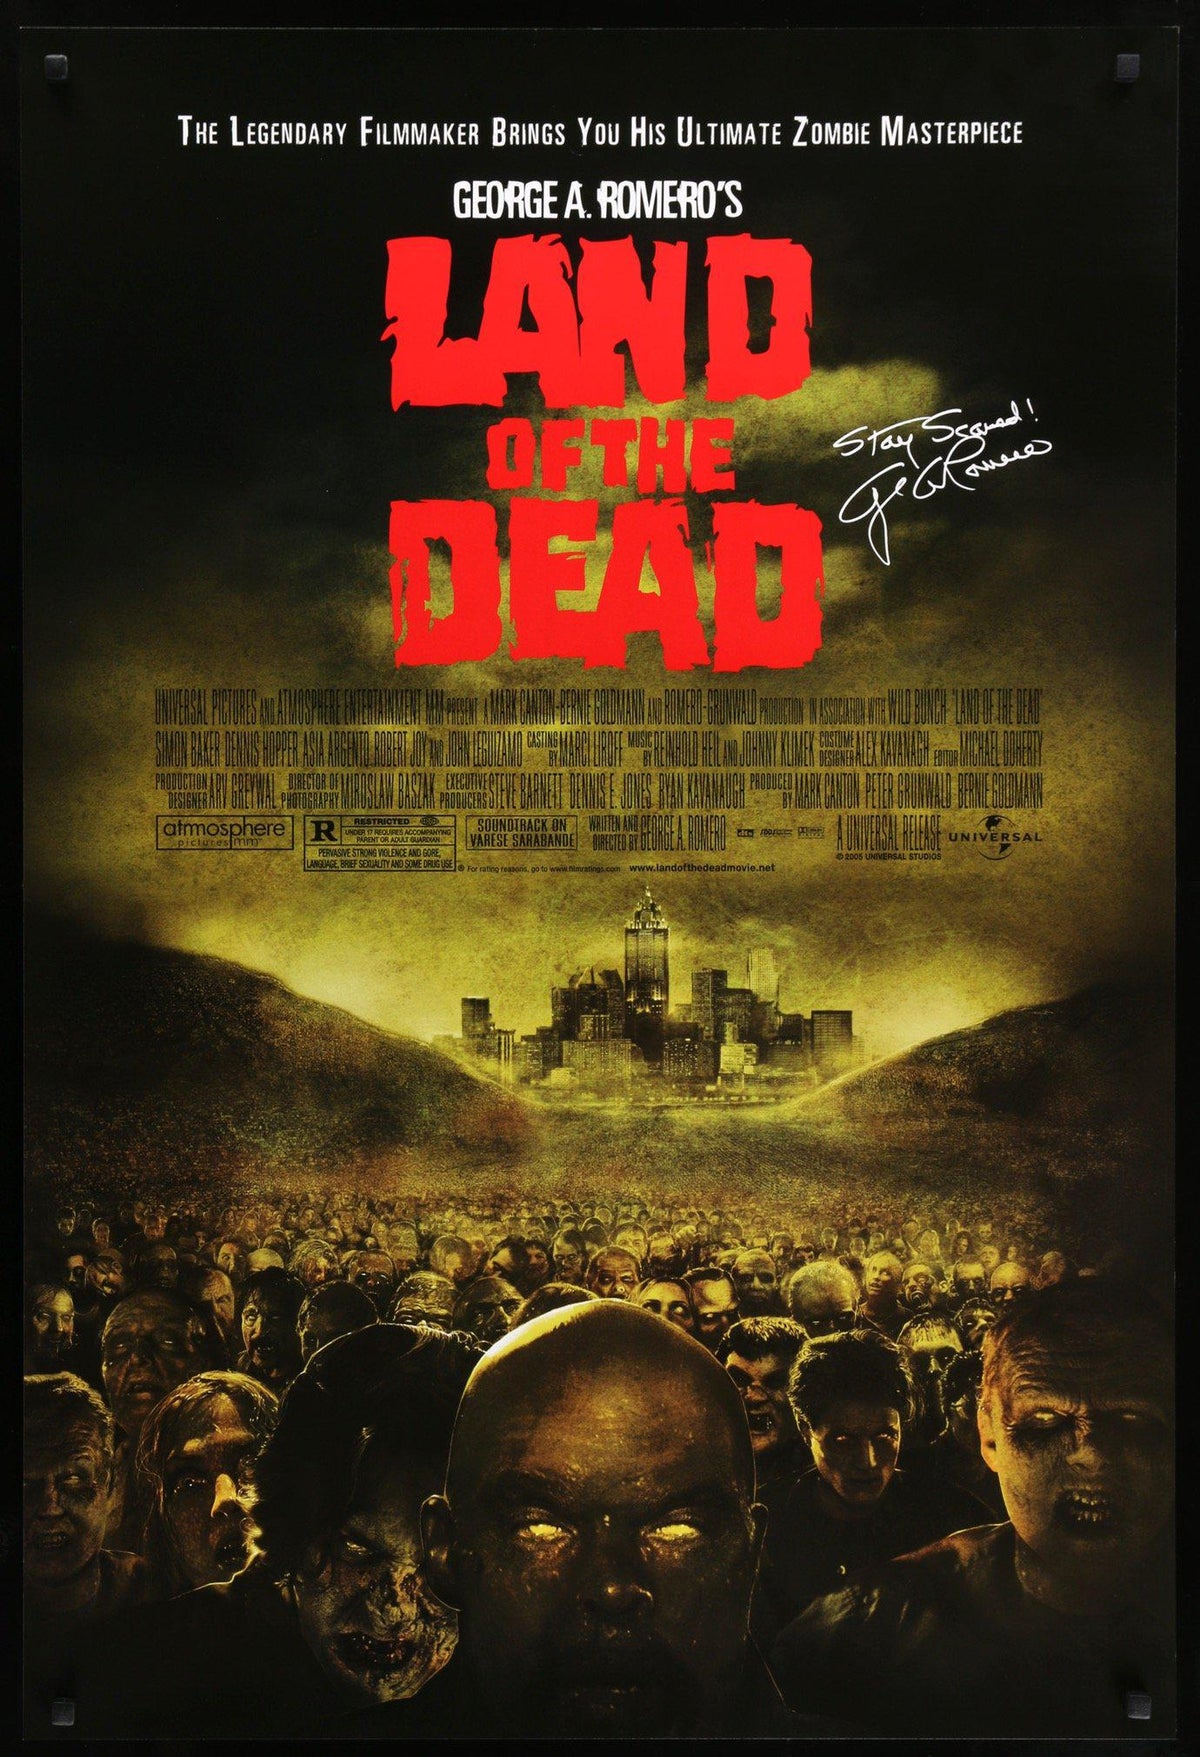 land of the dead